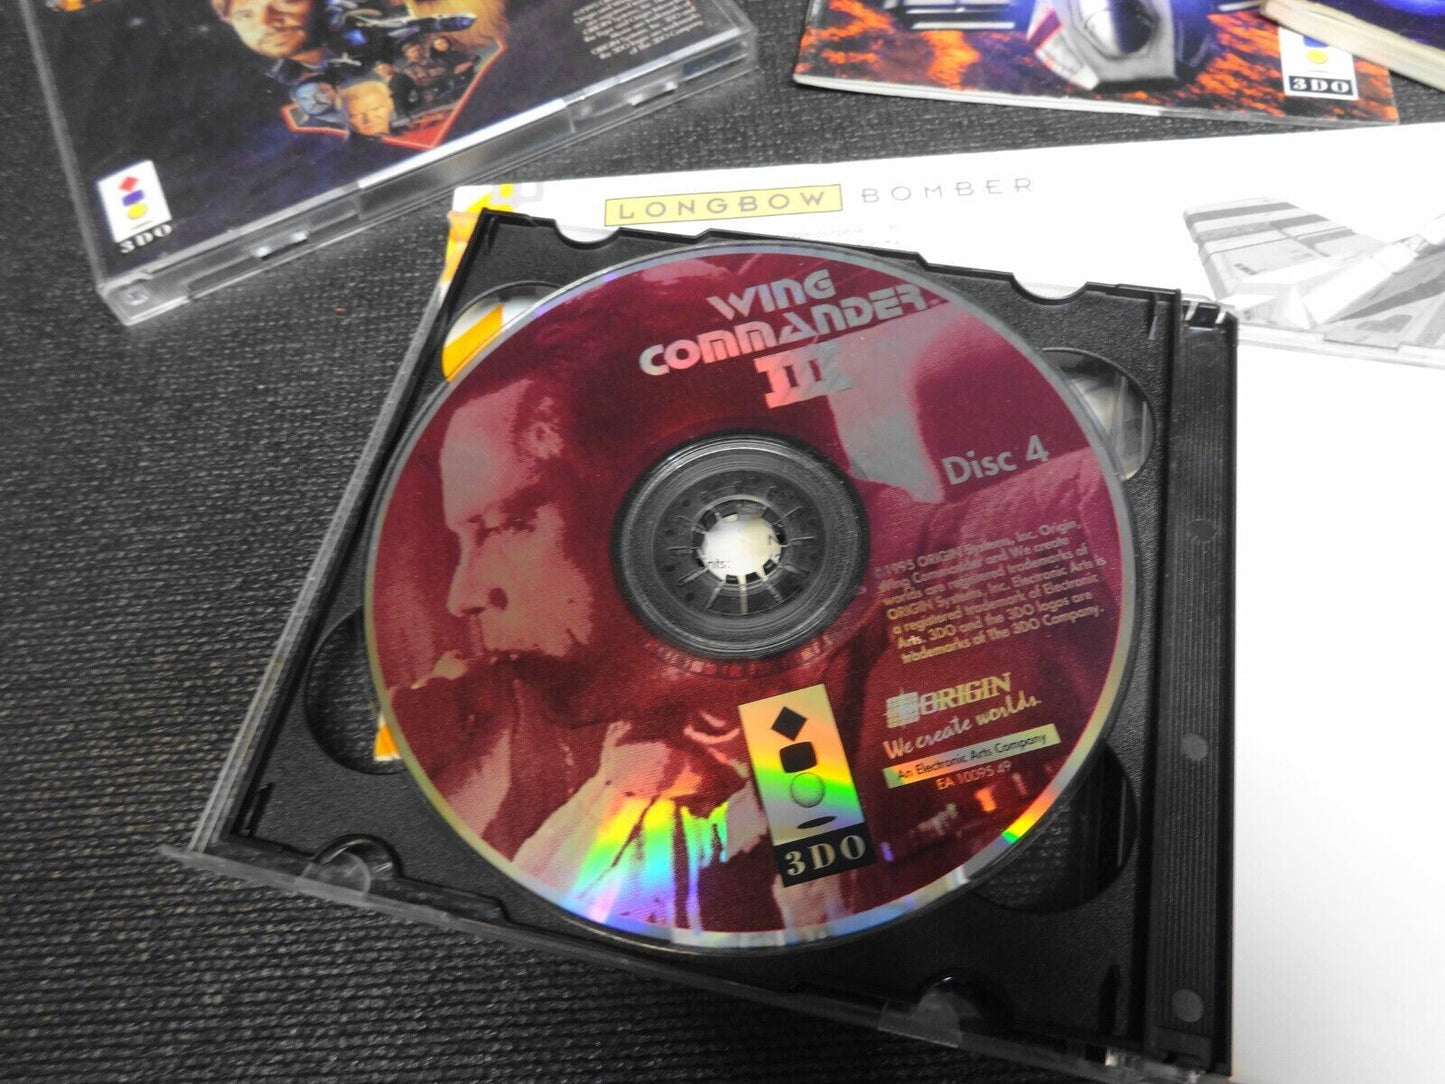 Wing Commander III: Heart of the Tiger (Panasonic 3DO) Complete Long Box